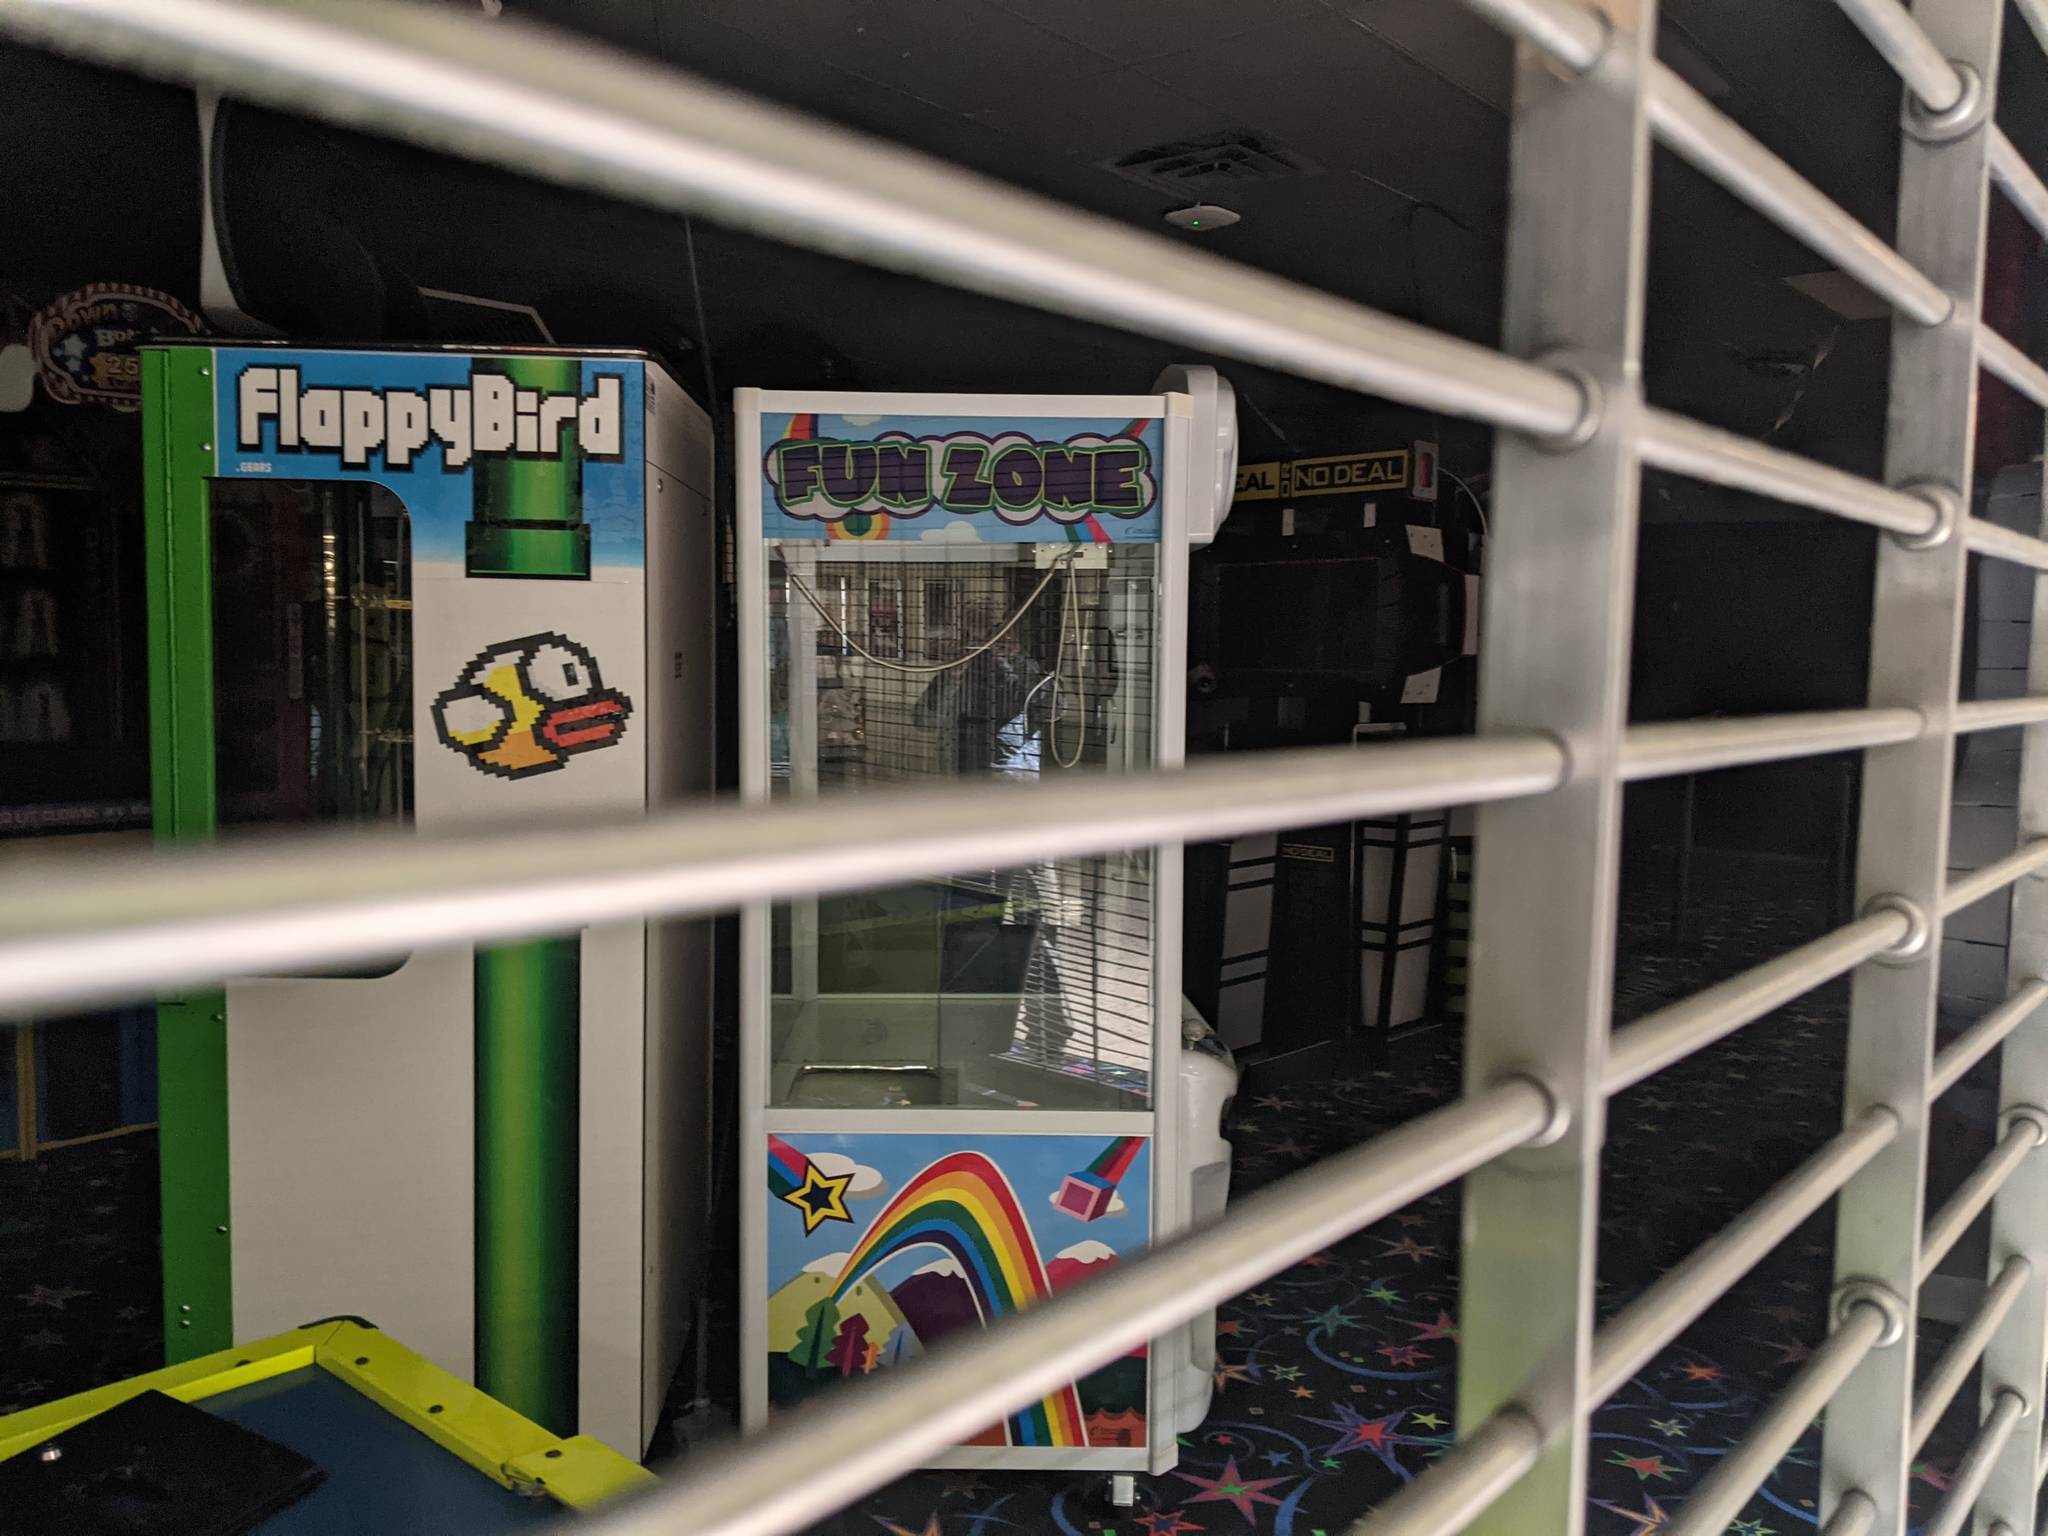 No noise was coming from a silenced-arcade Monday morning while store owners scrambled to find new locations.